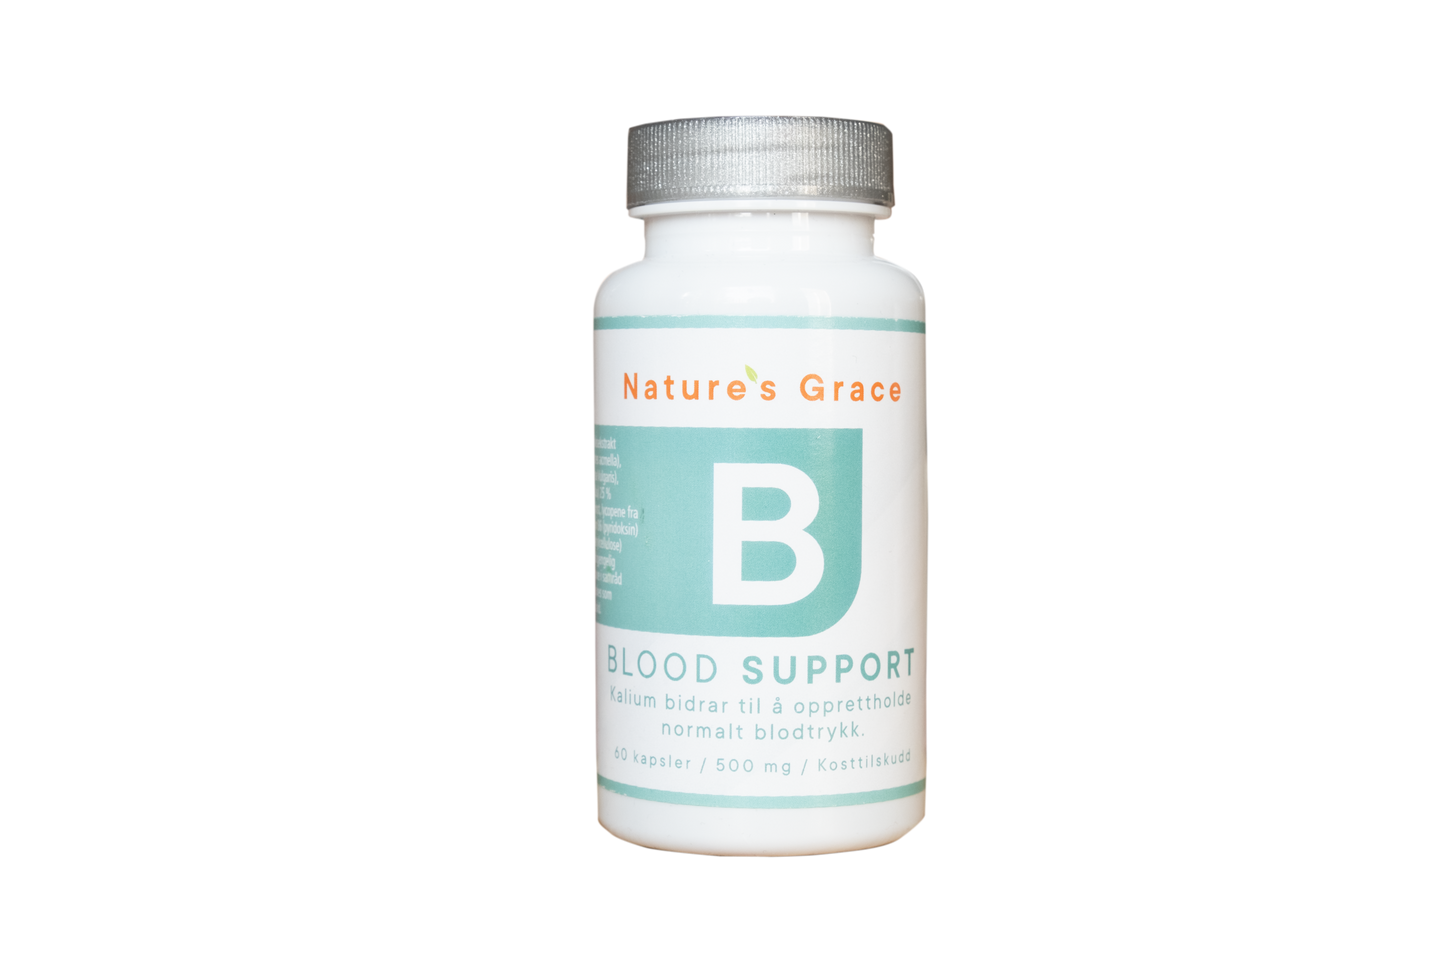 Nature's Grace Blood Support